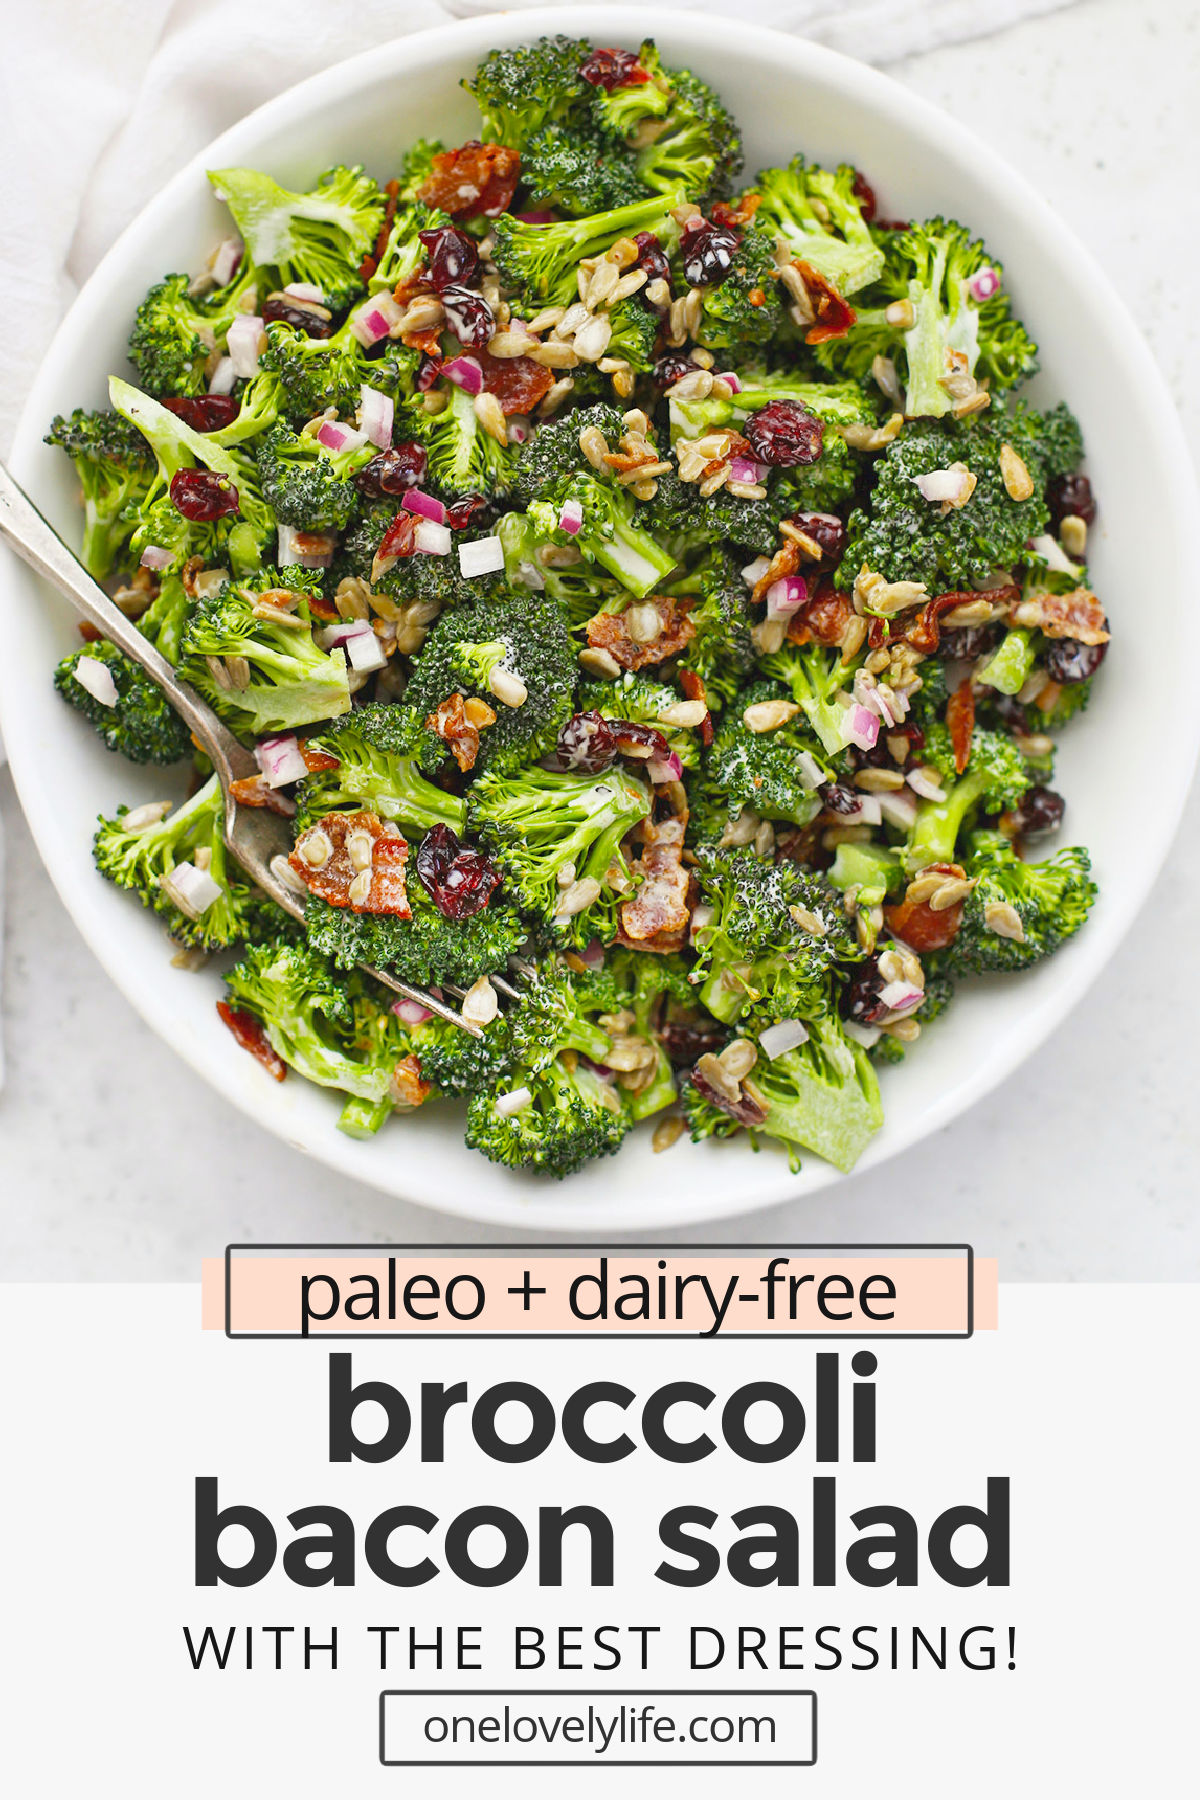 Overhead view of a bowl of broccoli bacon salad with text overlay that reads "paleo + dairy-free broccoli bacon salad with the best dressing!"